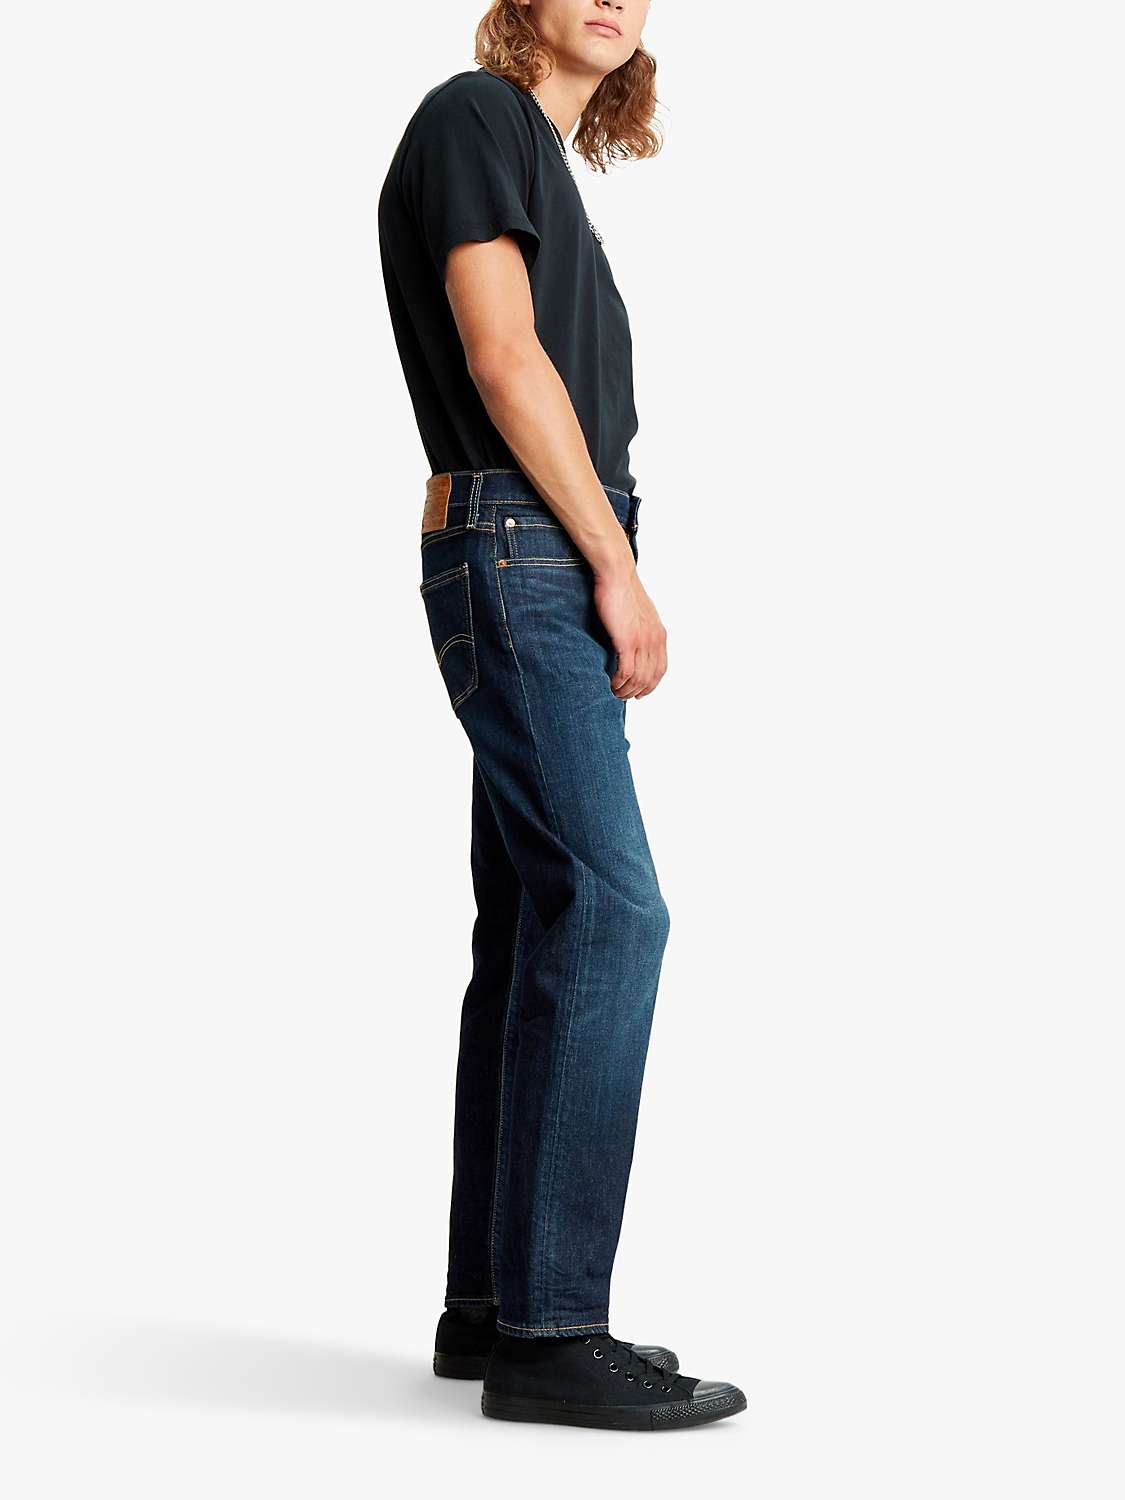 Levi's Big & Tall 502 Tapered Jeans, Biologia at John Lewis & Partners